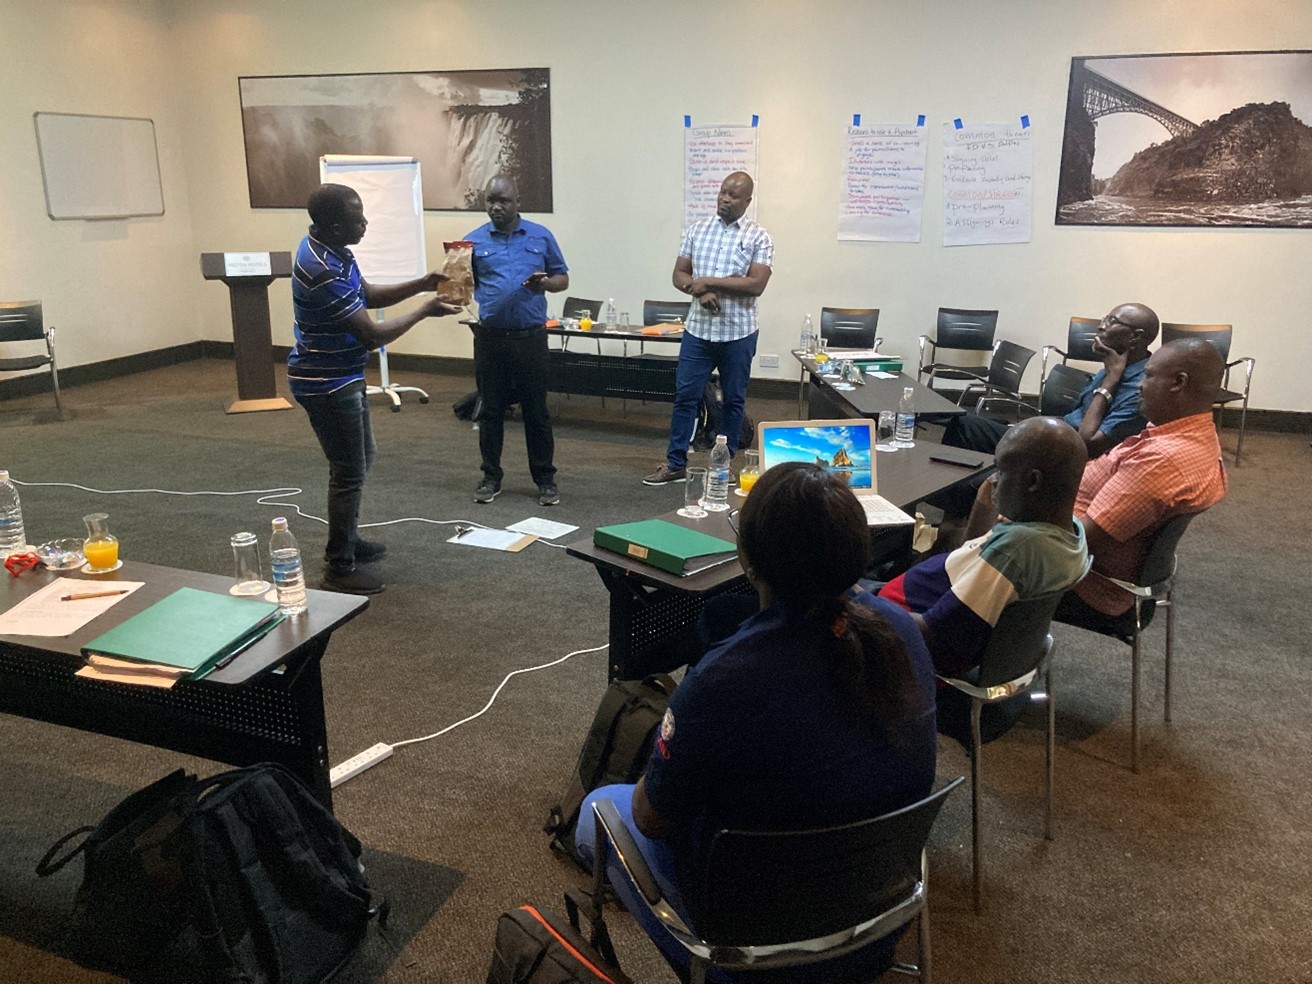 Zambia trainer cadre practicing facilitation and evidence collection module